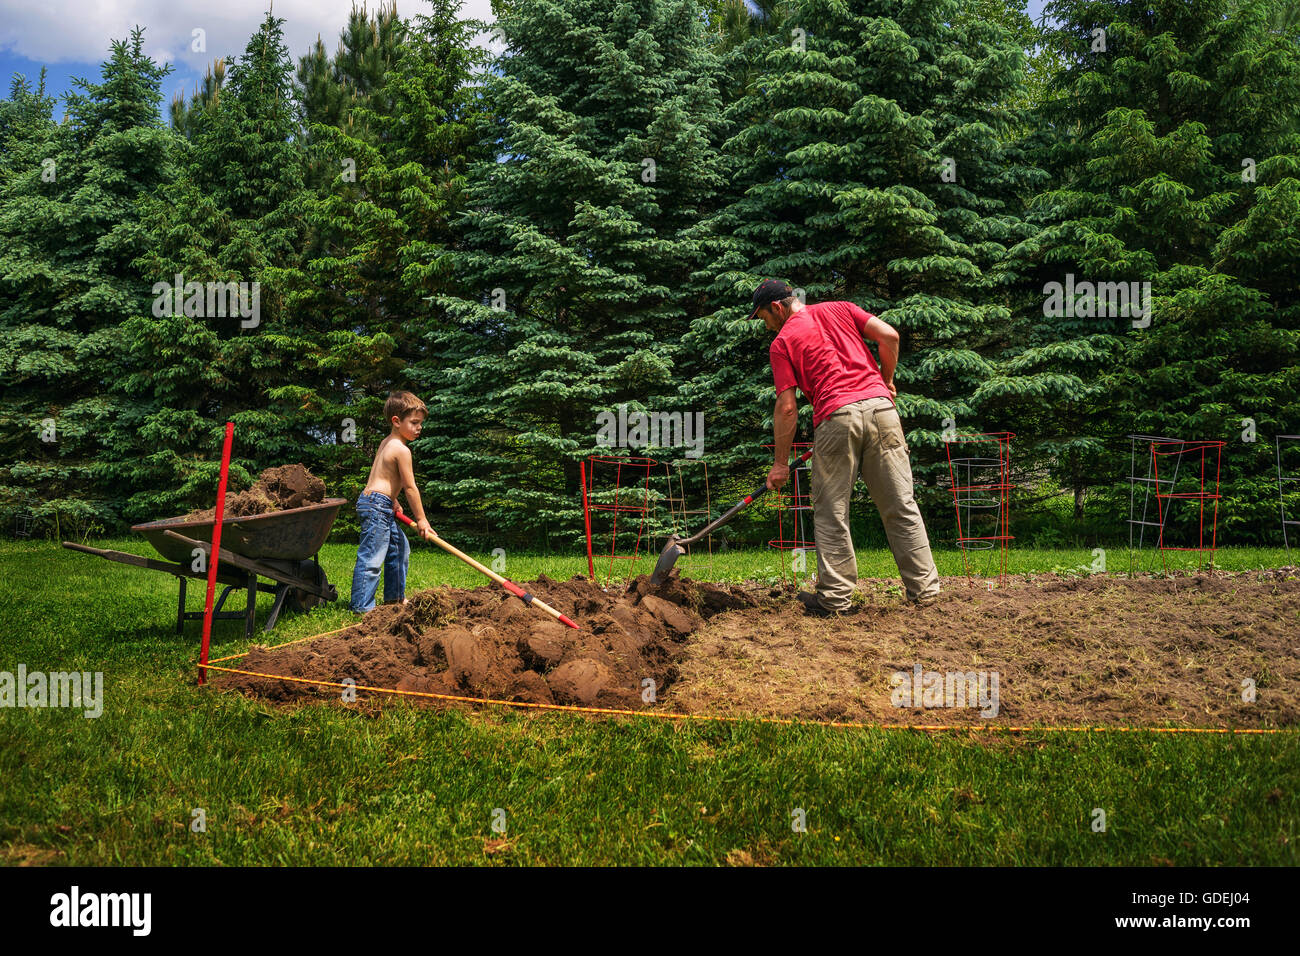 Father and son digging soil in garden Stock Photo